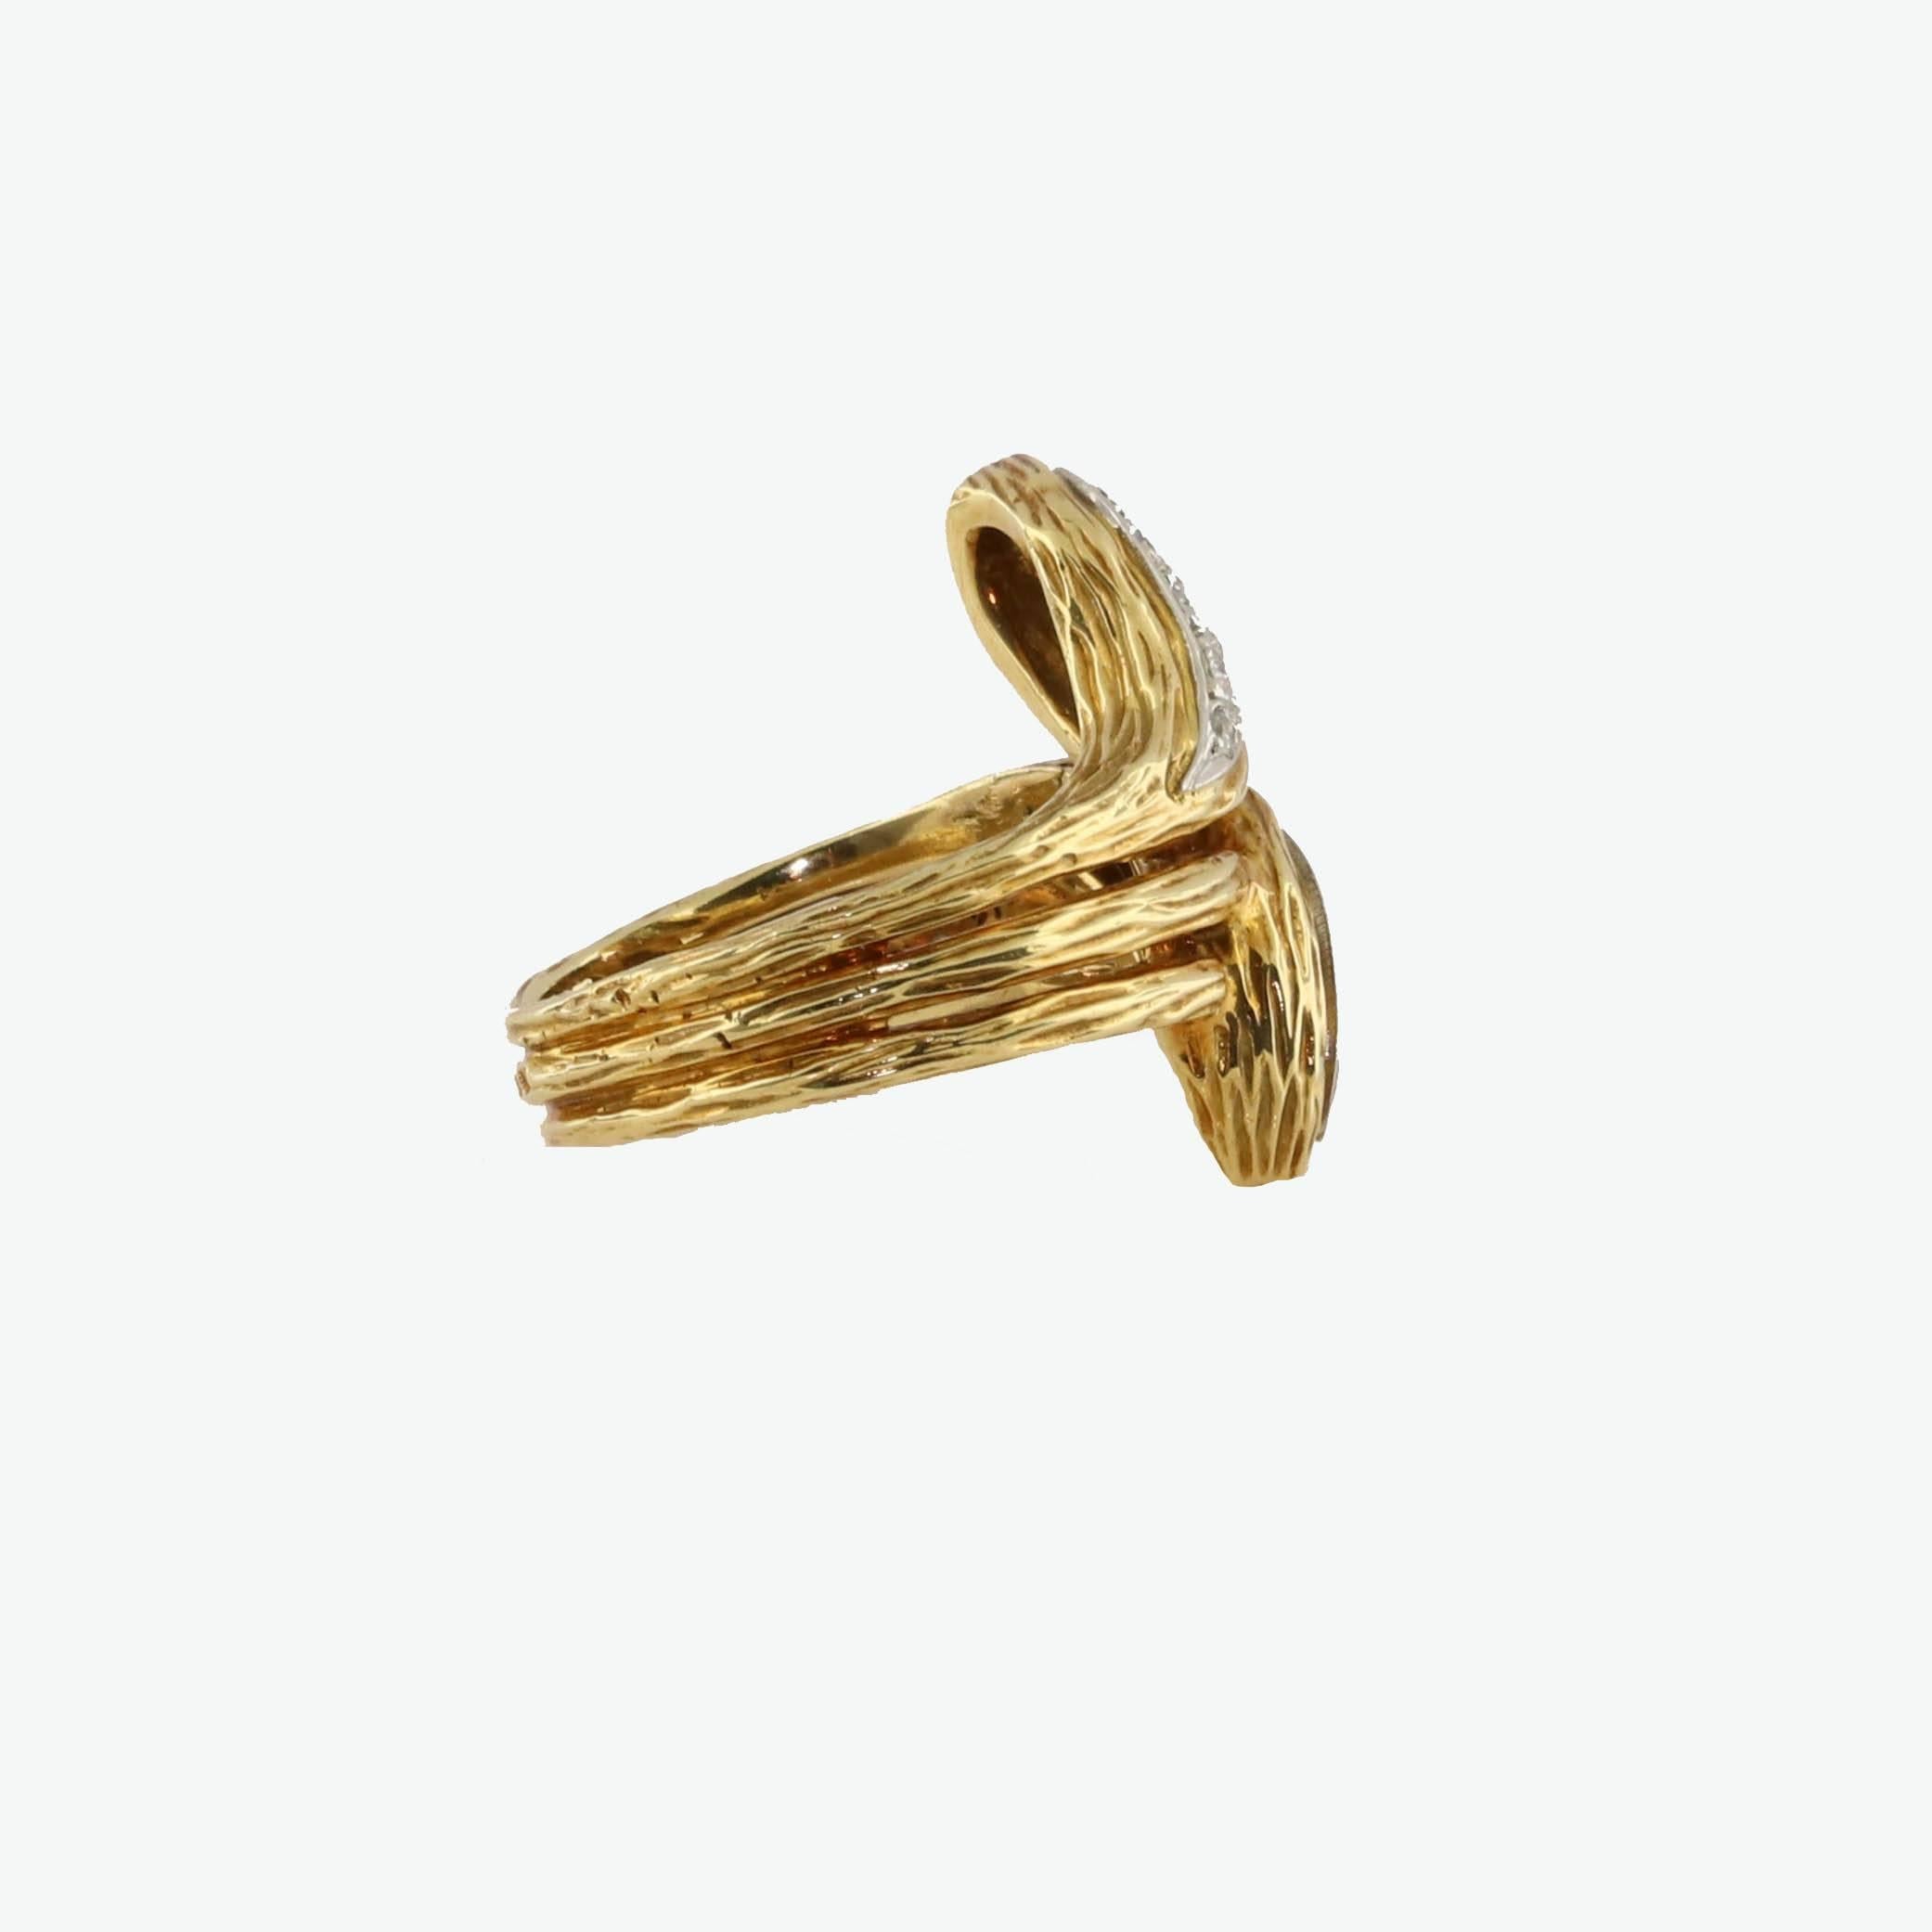 Modern Van Cleef and Arpels Diamond and 18 Karat Yellow Gold Bypass Ring